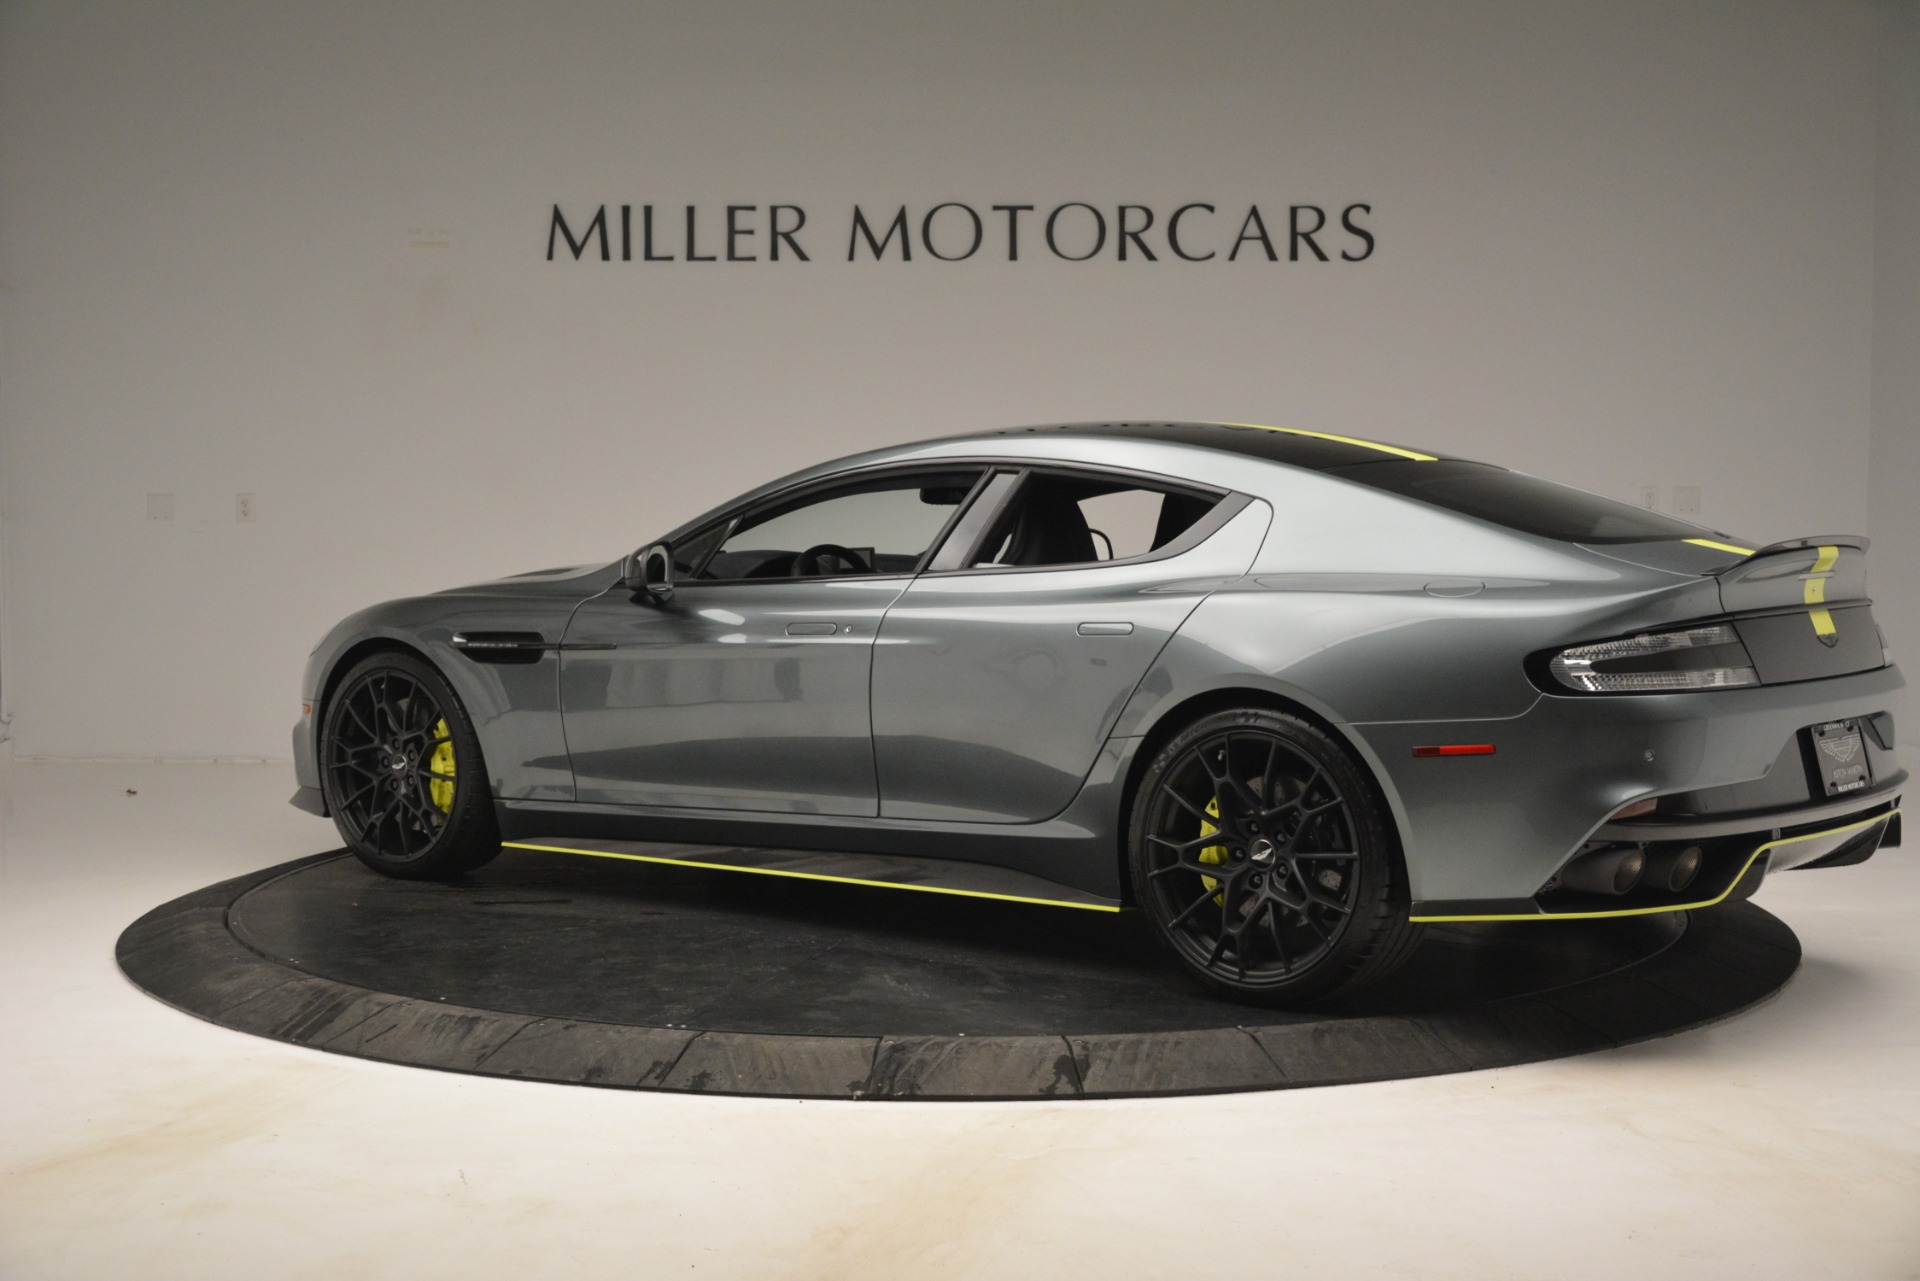 The Ultimate Expression Of Aston Martin Performance: The 2019 Rapide AMR